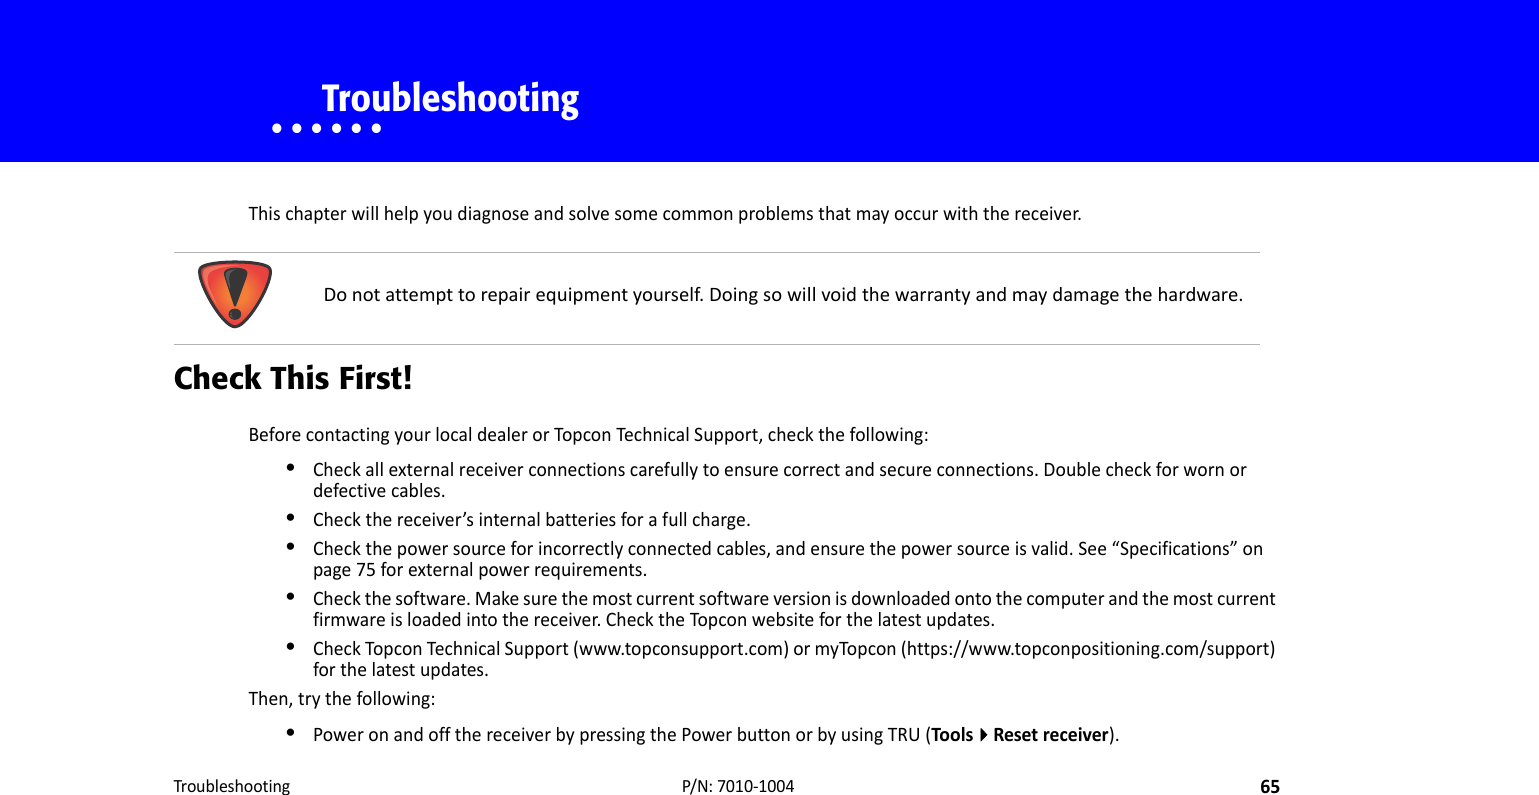 Troubleshooting65P/N:7010‐1004• • • • • •    TroubleshootingThischapterwillhelpyoudiagnoseandsolvesomecommonproblemsthatmayoccurwiththereceiver.Check This First!BeforecontactingyourlocaldealerorTopconTechnicalSupport,checkthefollowing:•Checkallexternalreceiverconnectionscarefullytoensurecorrectandsecureconnections.Doublecheckforwornordefectivecables.•Checkthereceiver’sinternalbatteriesforafullcharge.•Checkthepowersourceforincorrectlyconnectedcables,andensurethepowersourceisvalid.See“Specifications”onpage75forexternalpowerrequirements.•Checkthesoftware.Makesurethemostcurrentsoftwareversionisdownloadedontothecomputerandthemostcurrentfirmwareisloadedintothereceiver.ChecktheTopconwebsiteforthelatestupdates.•CheckTopconTechnicalSupport(www.topconsupport.com)ormyTopcon(https://www.topconpositioning.com/support)forthelatestupdates.Then,trythefollowing:•PoweronandoffthereceiverbypressingthePowerbuttonorbyusingTRU(ToolsResetreceiver).Donotattempttorepairequipmentyourself.Doingsowillvoidthewarrantyandmaydamagethehardware.